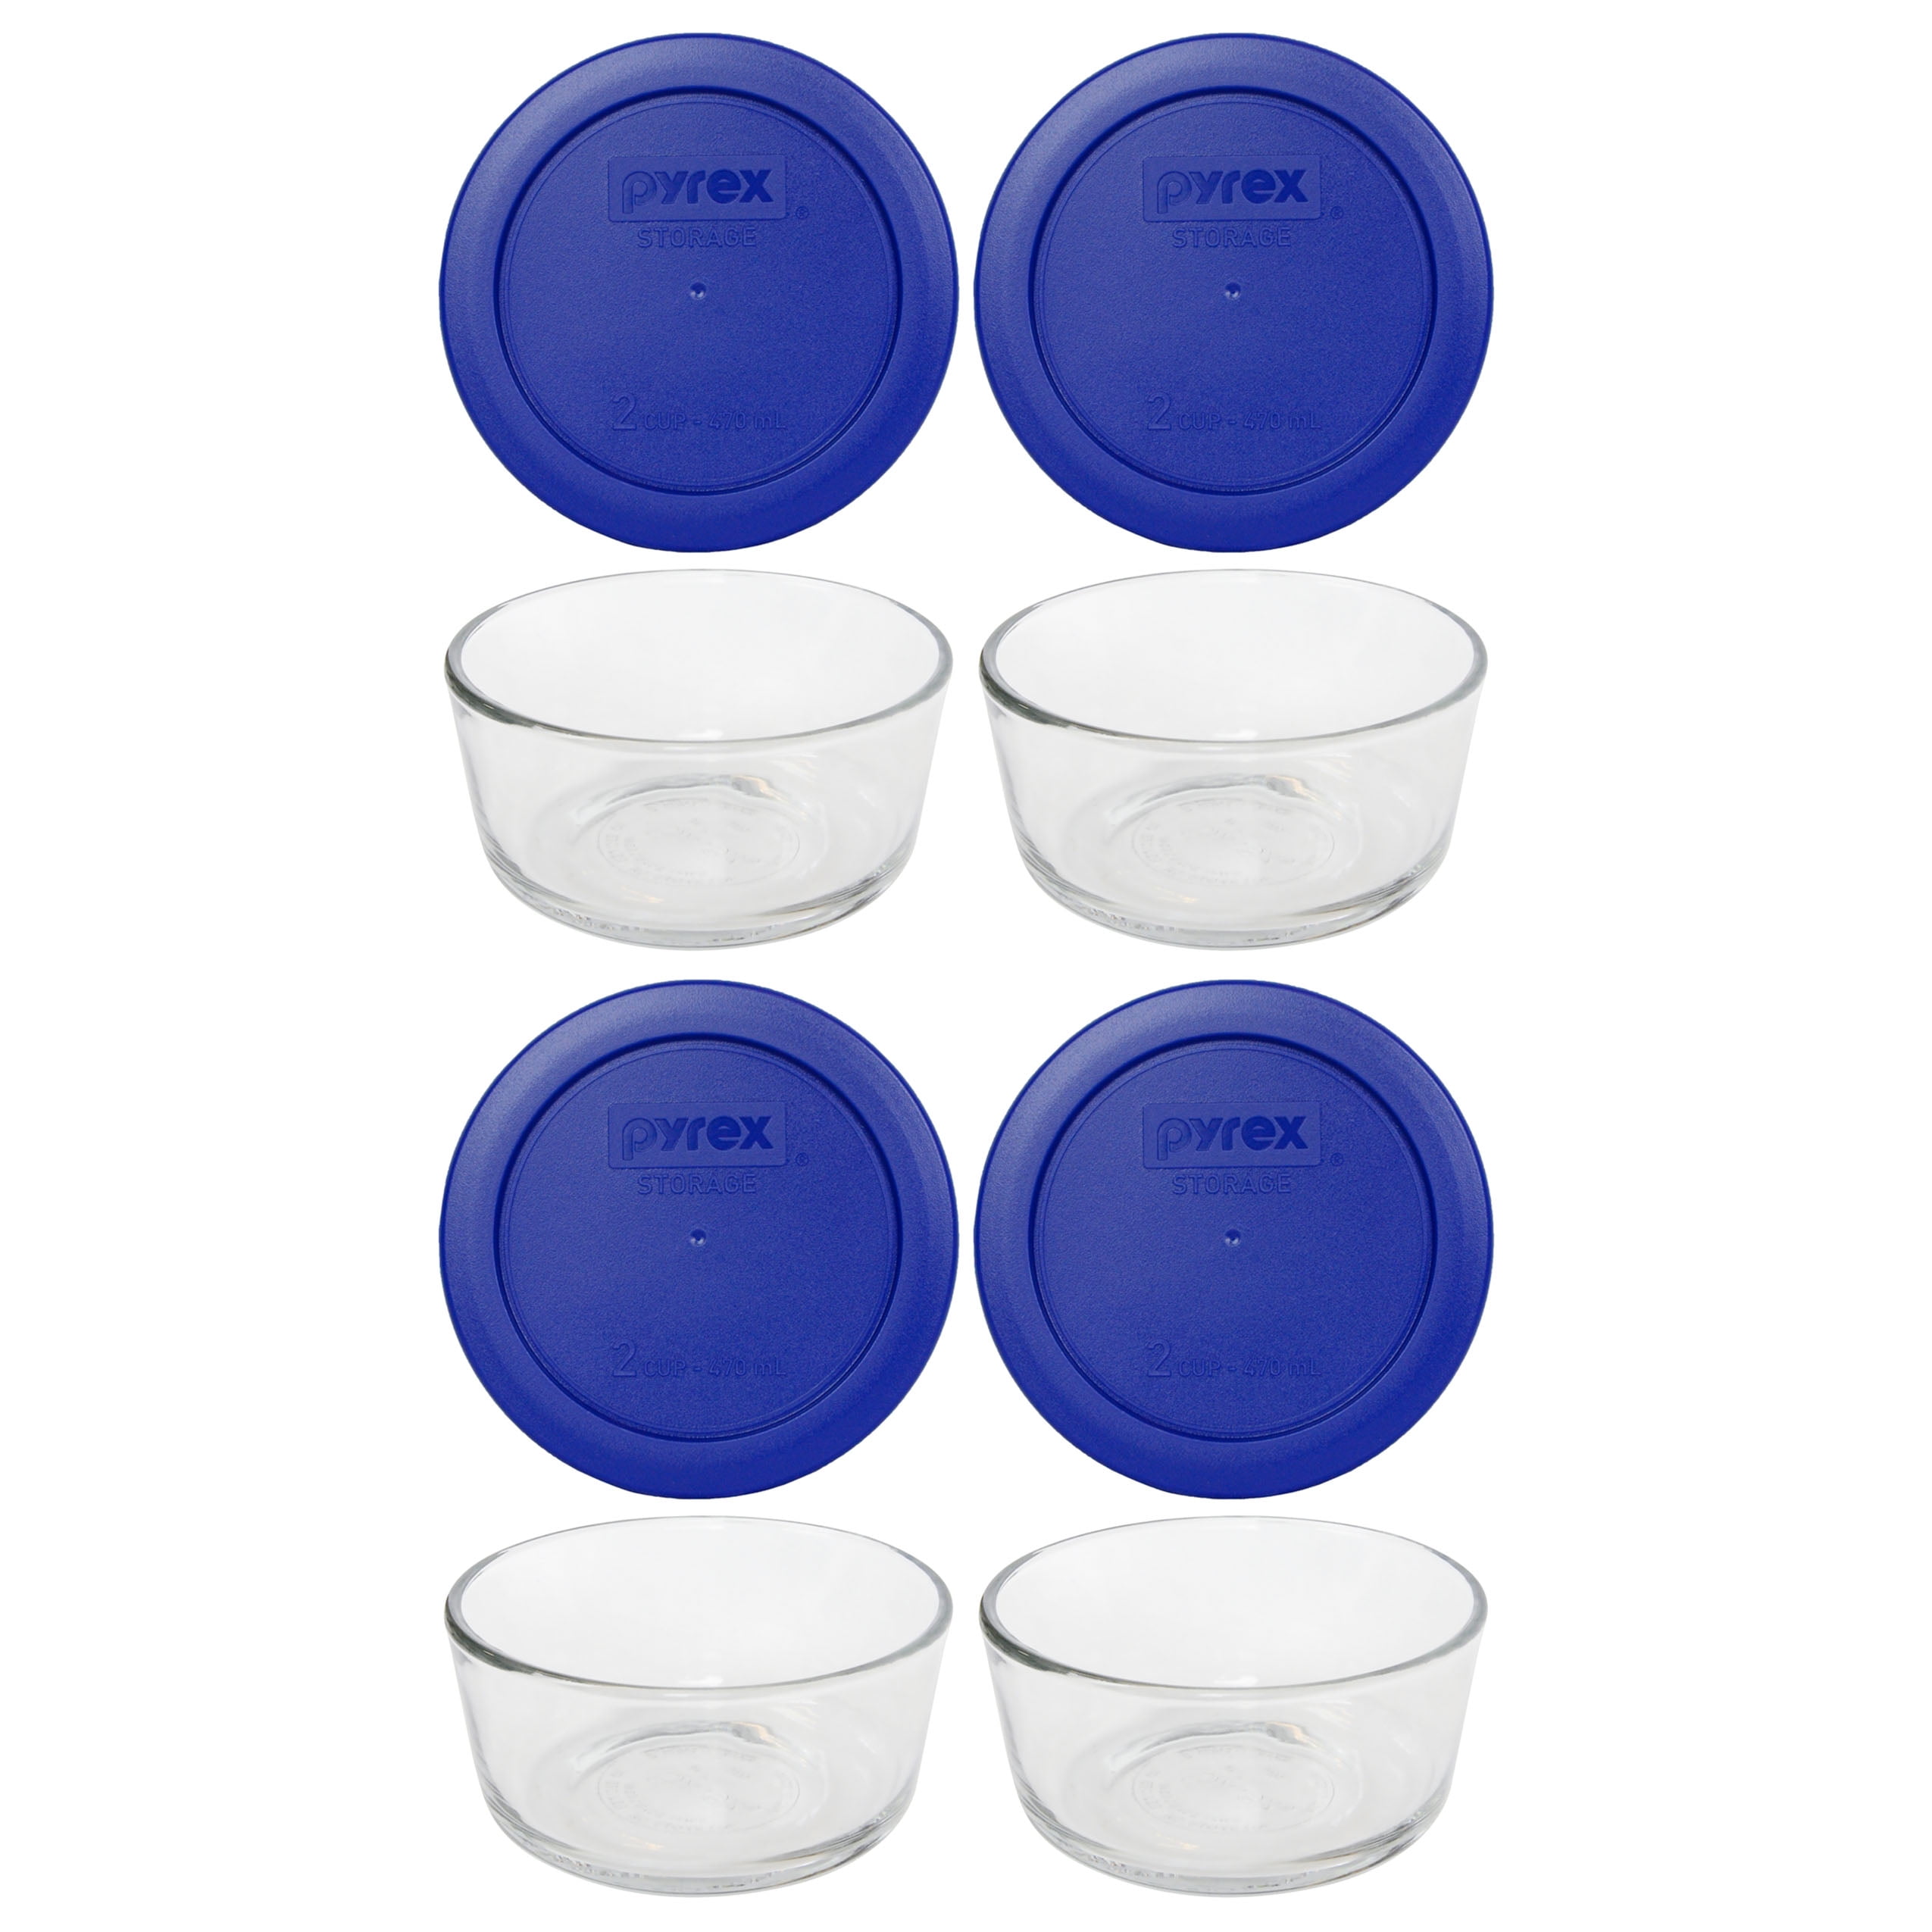 2 Pack Pyrex Orange 2 Cup 4.5 Round Storage Cover 7200-PC for Glass Bowls